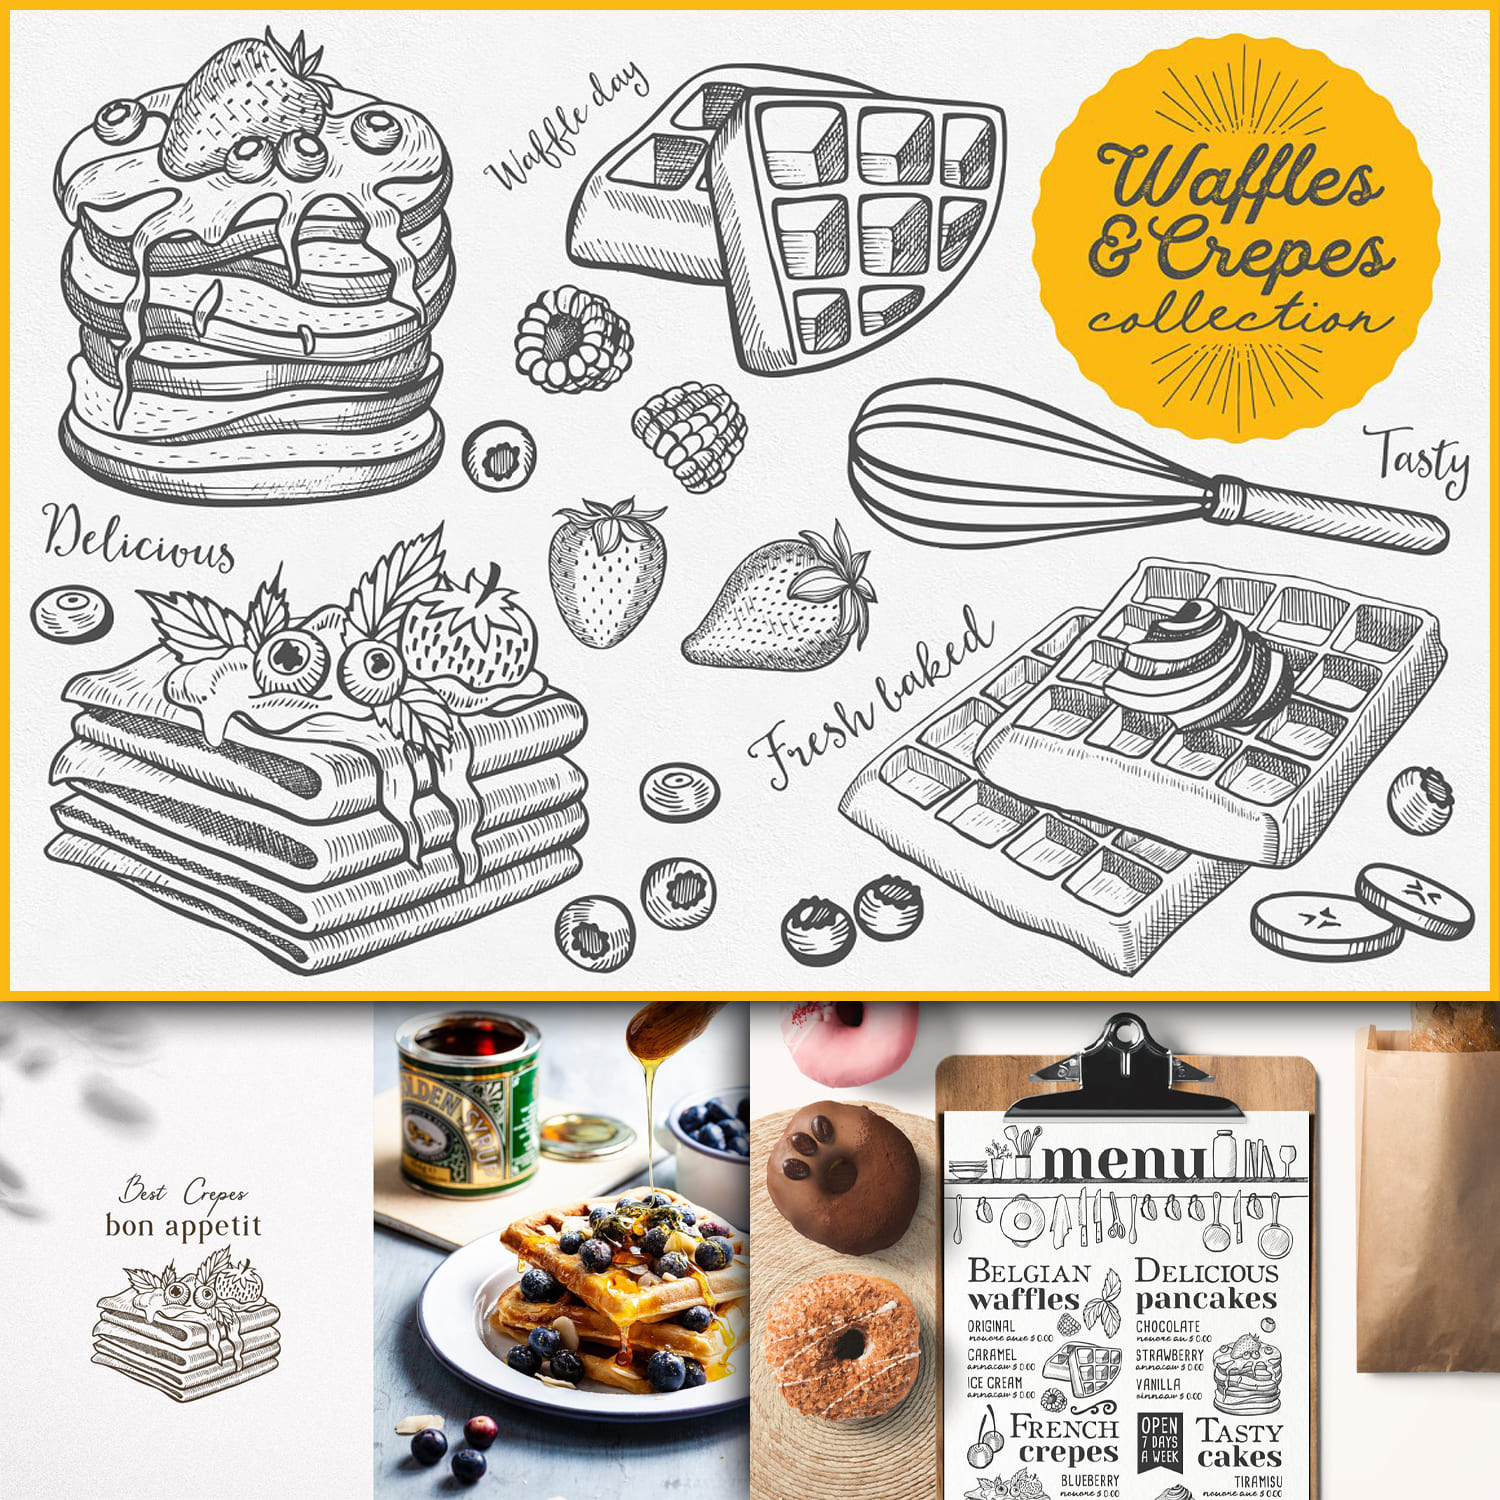 Waffles & Crepes hand-drawn graphic cover.